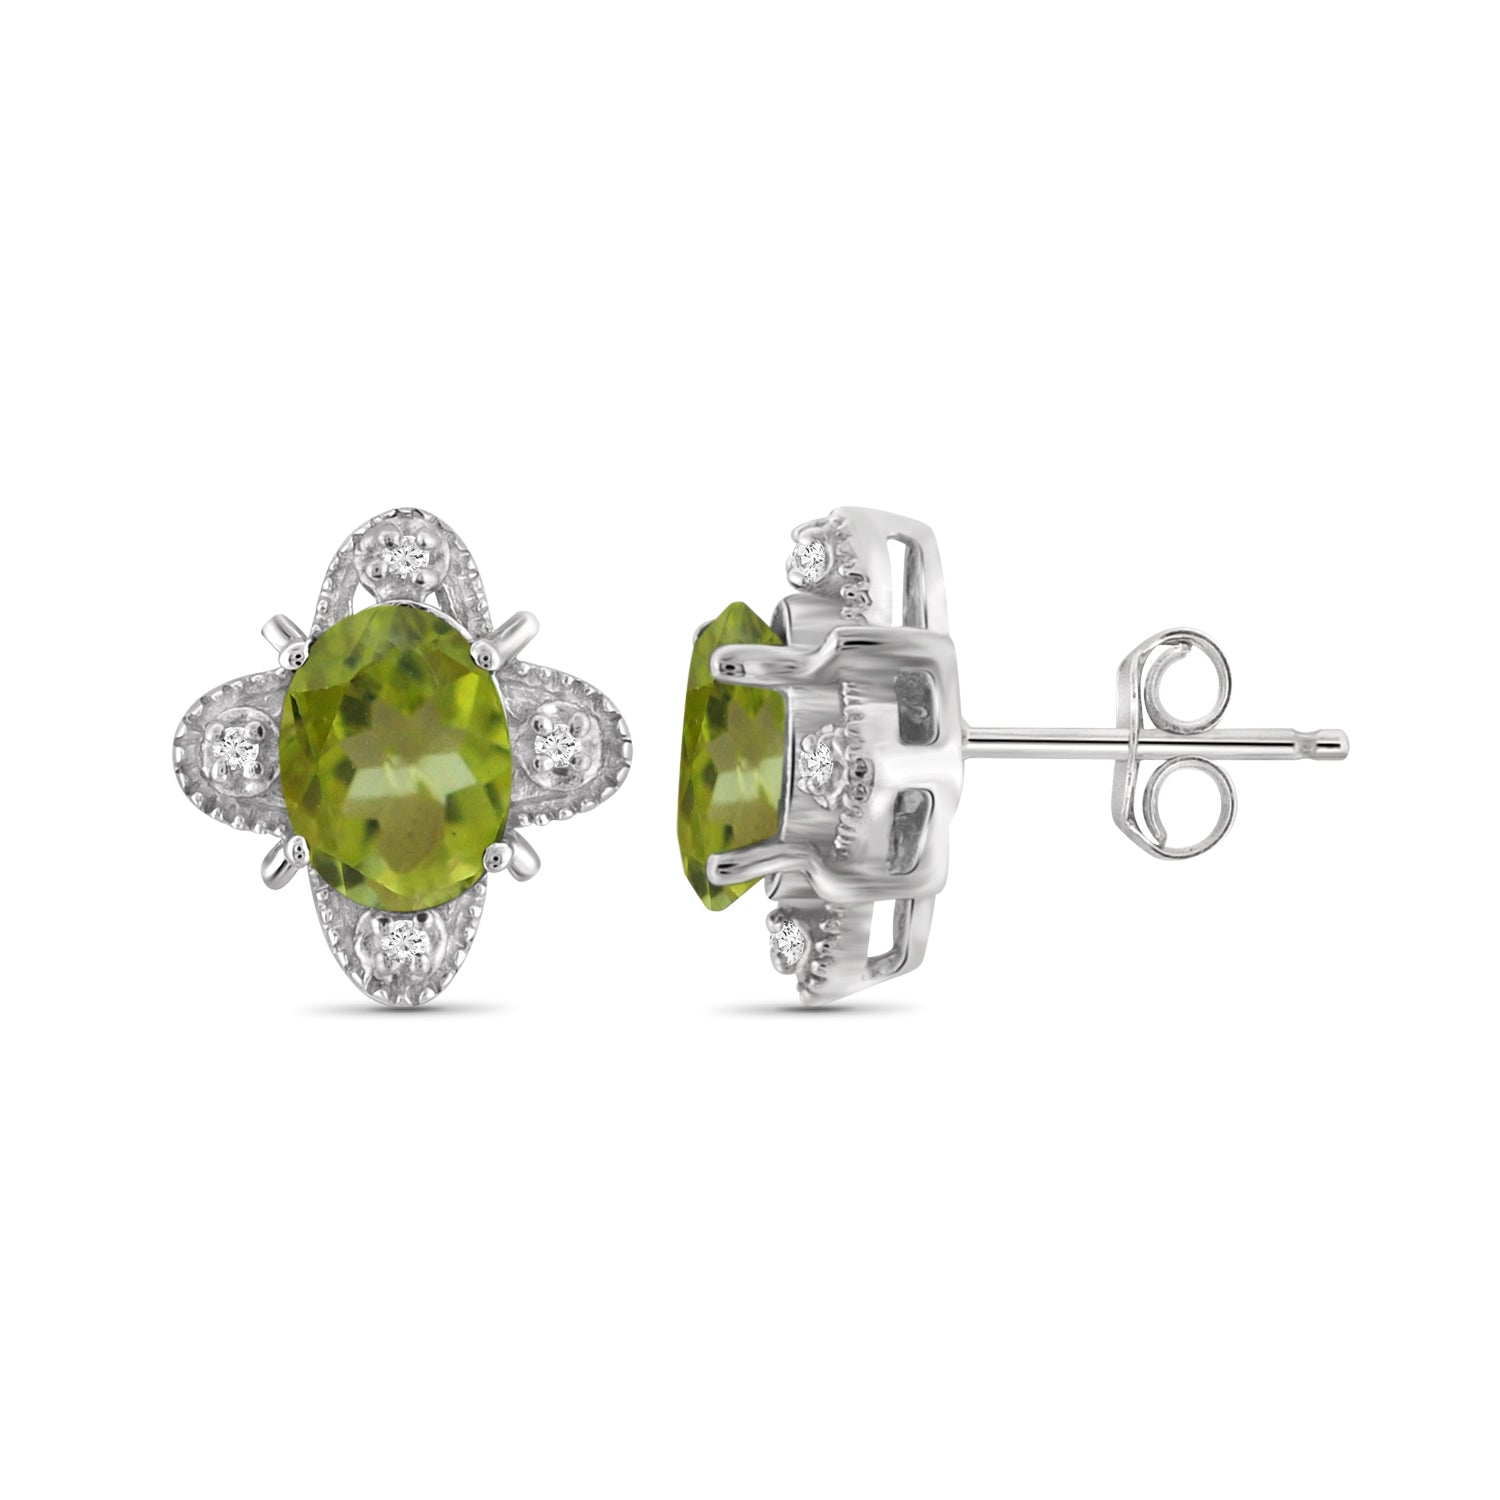 1 1/2 Carat T.G.W. Peridot And White Diamond Accent Sterling Silver Stud Earrings